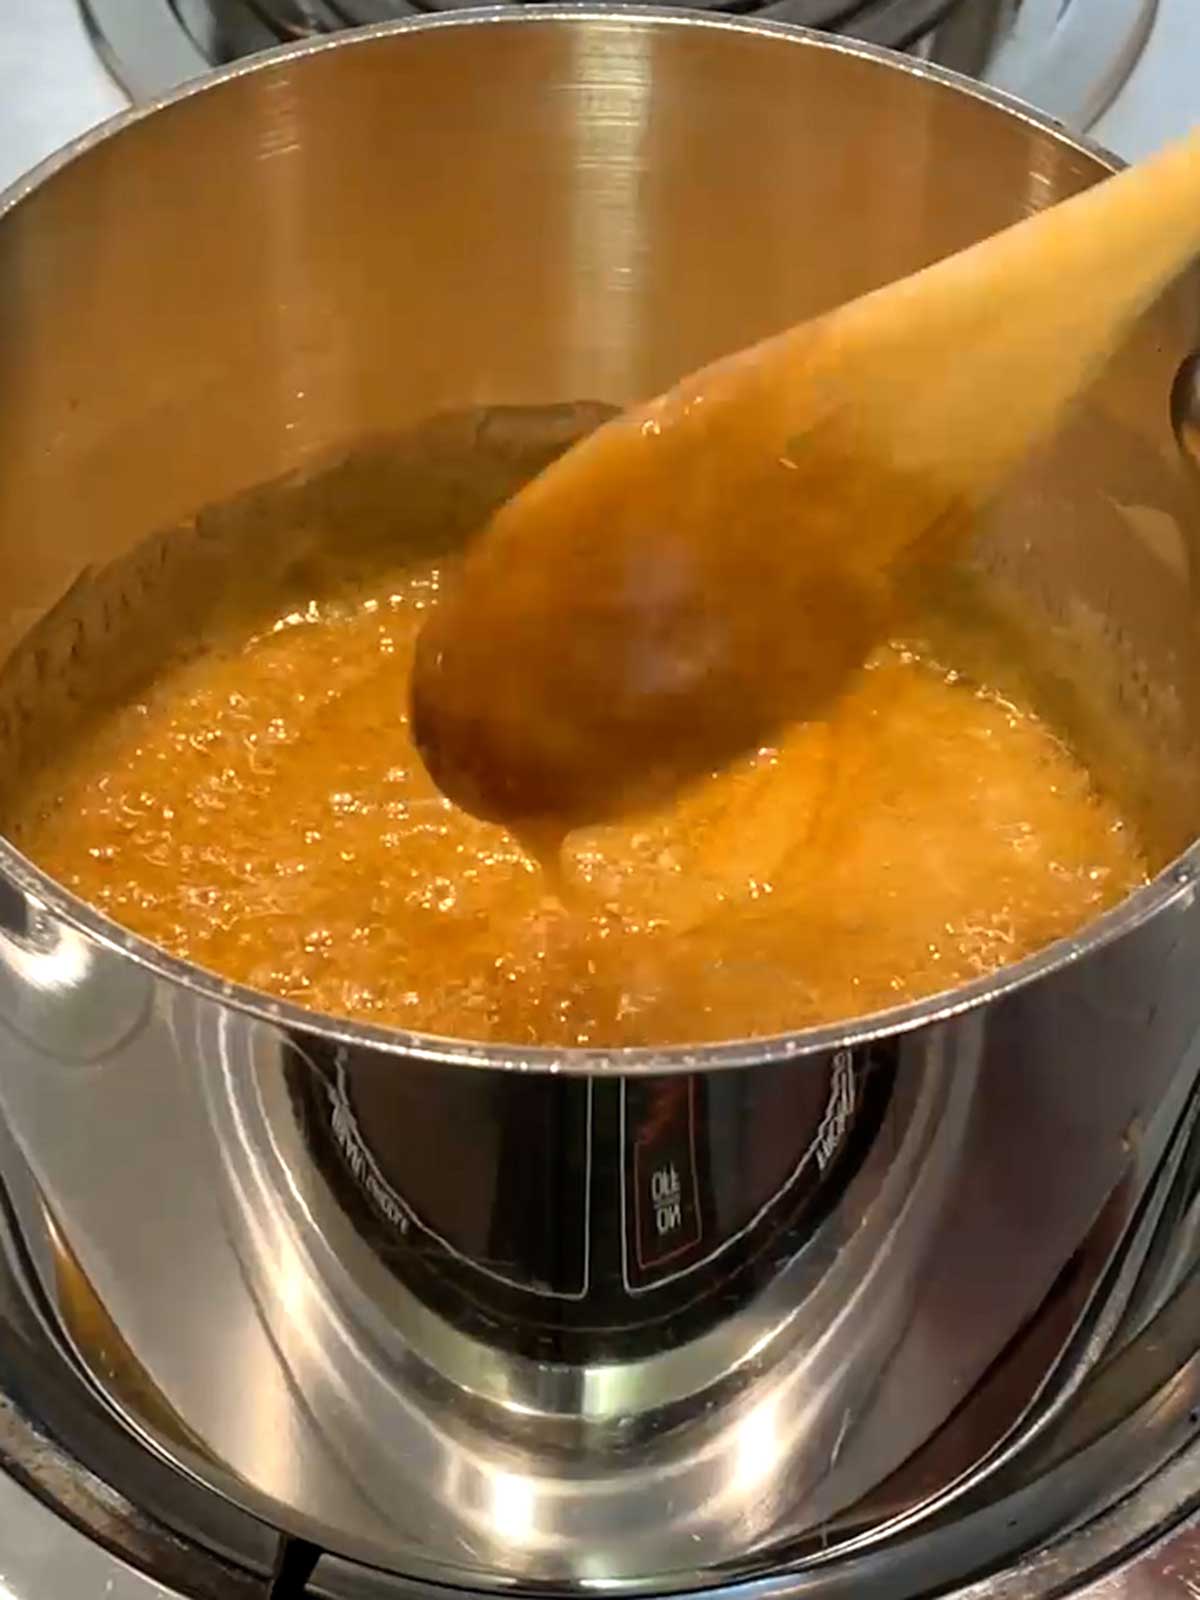 Caramel mixture after addition of baking soda and vanilla extract.